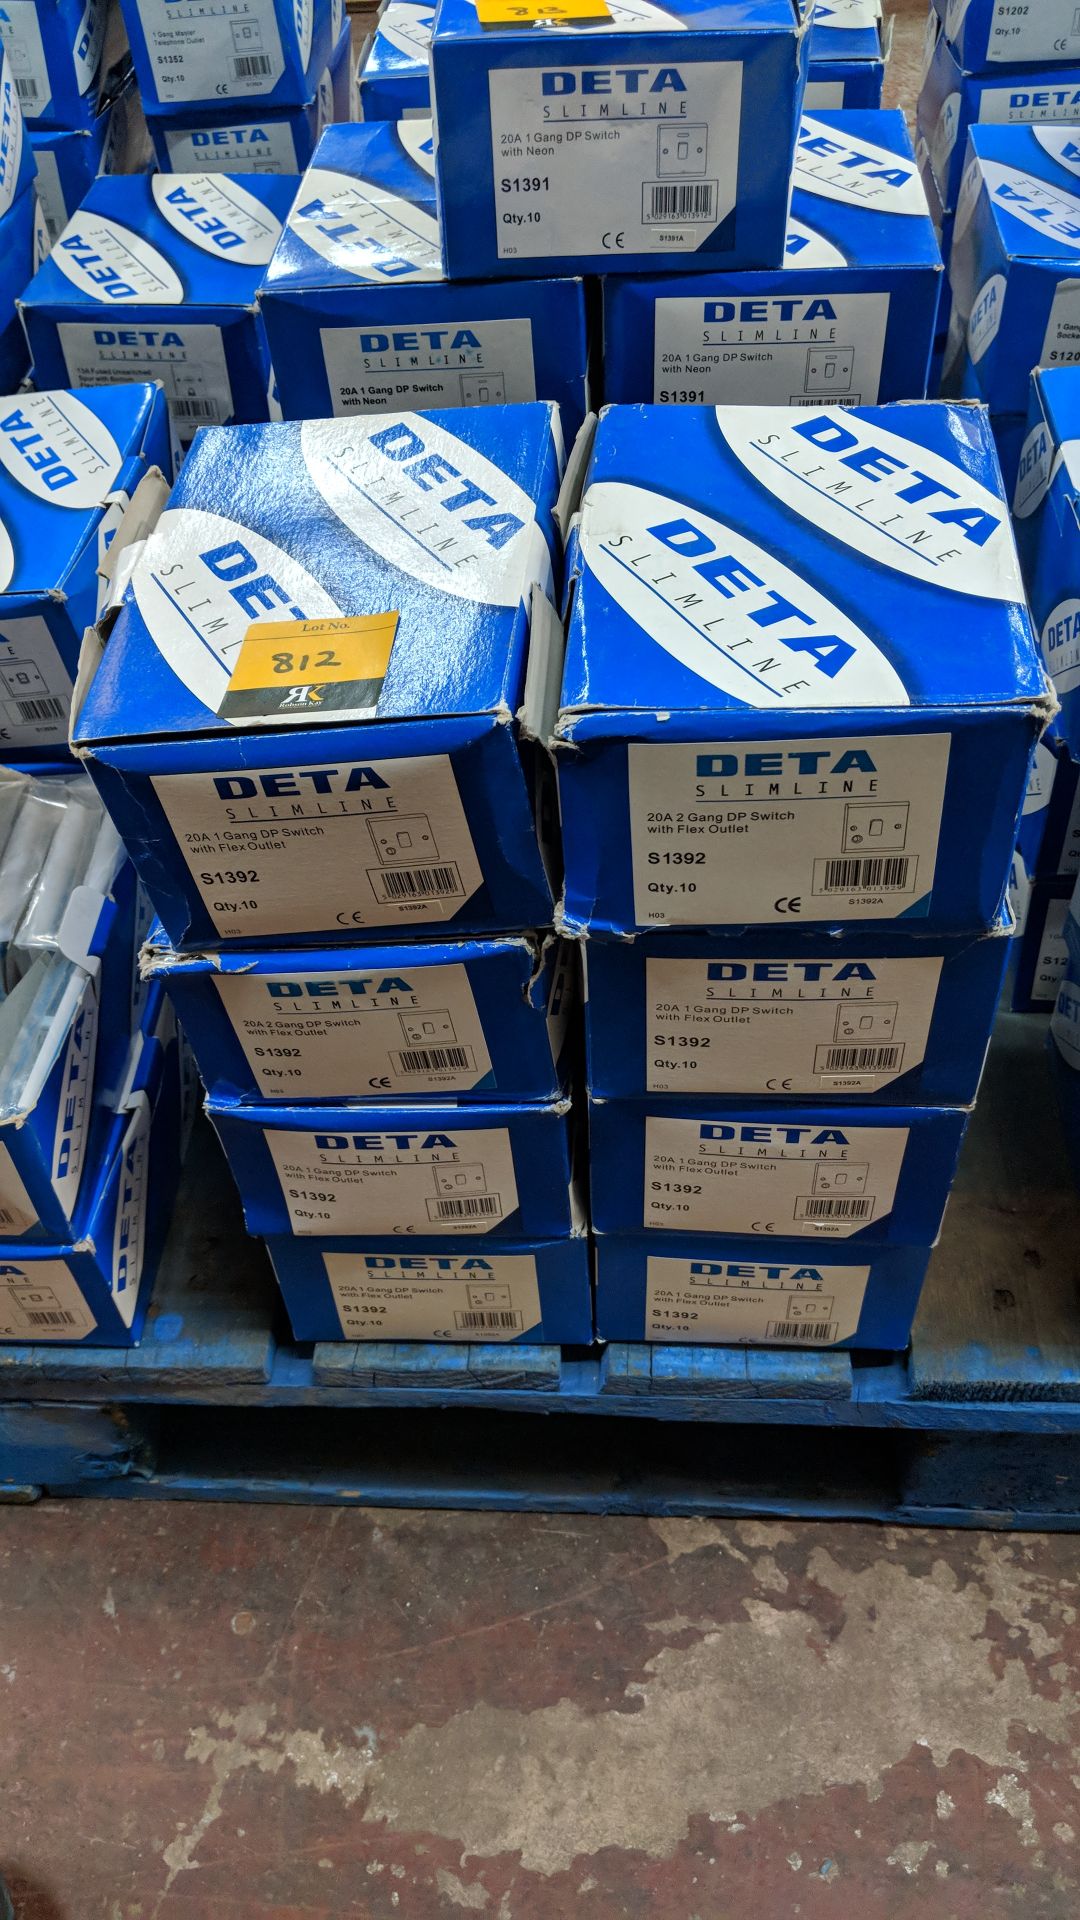 80 off Deta Slimline 20A 1 gang DP switches The vast majority of products in this auction appear